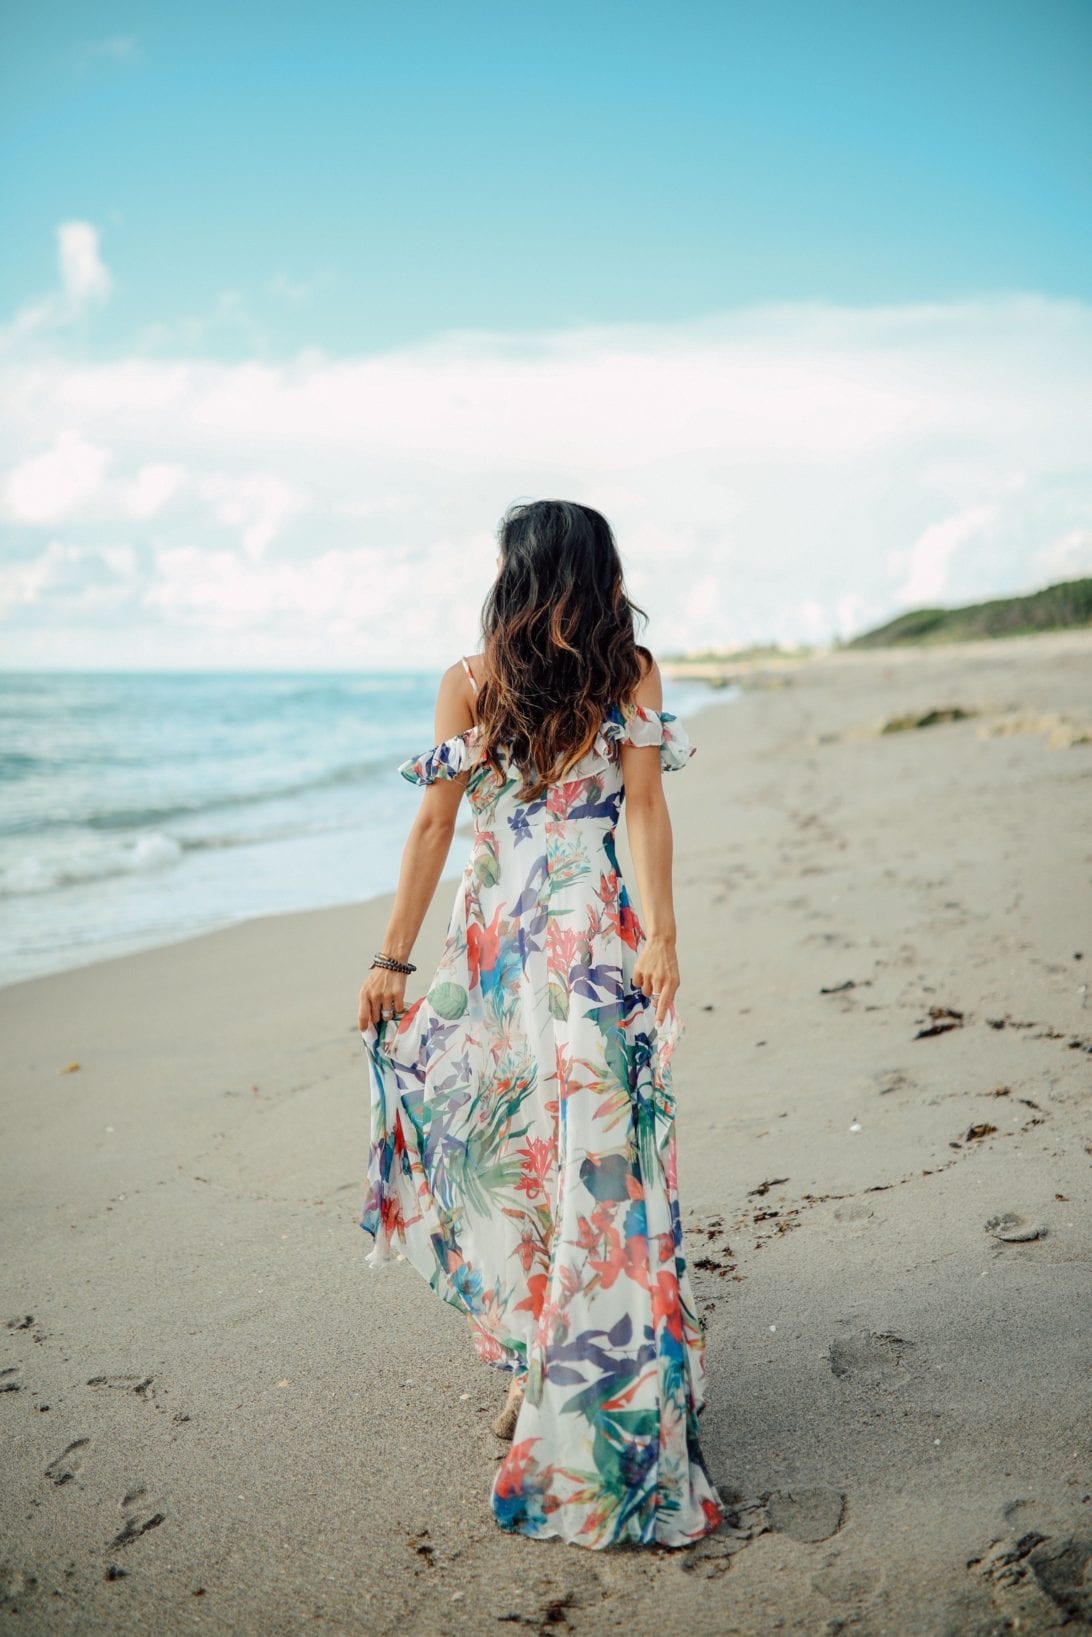 beach photoshoot, what to wear on the beach, what to wear at a photoshoot, ruffle maxi, floral maxi, beach style, summer dresses under $50, beach model, how to model, model poses, beach engagement shoots